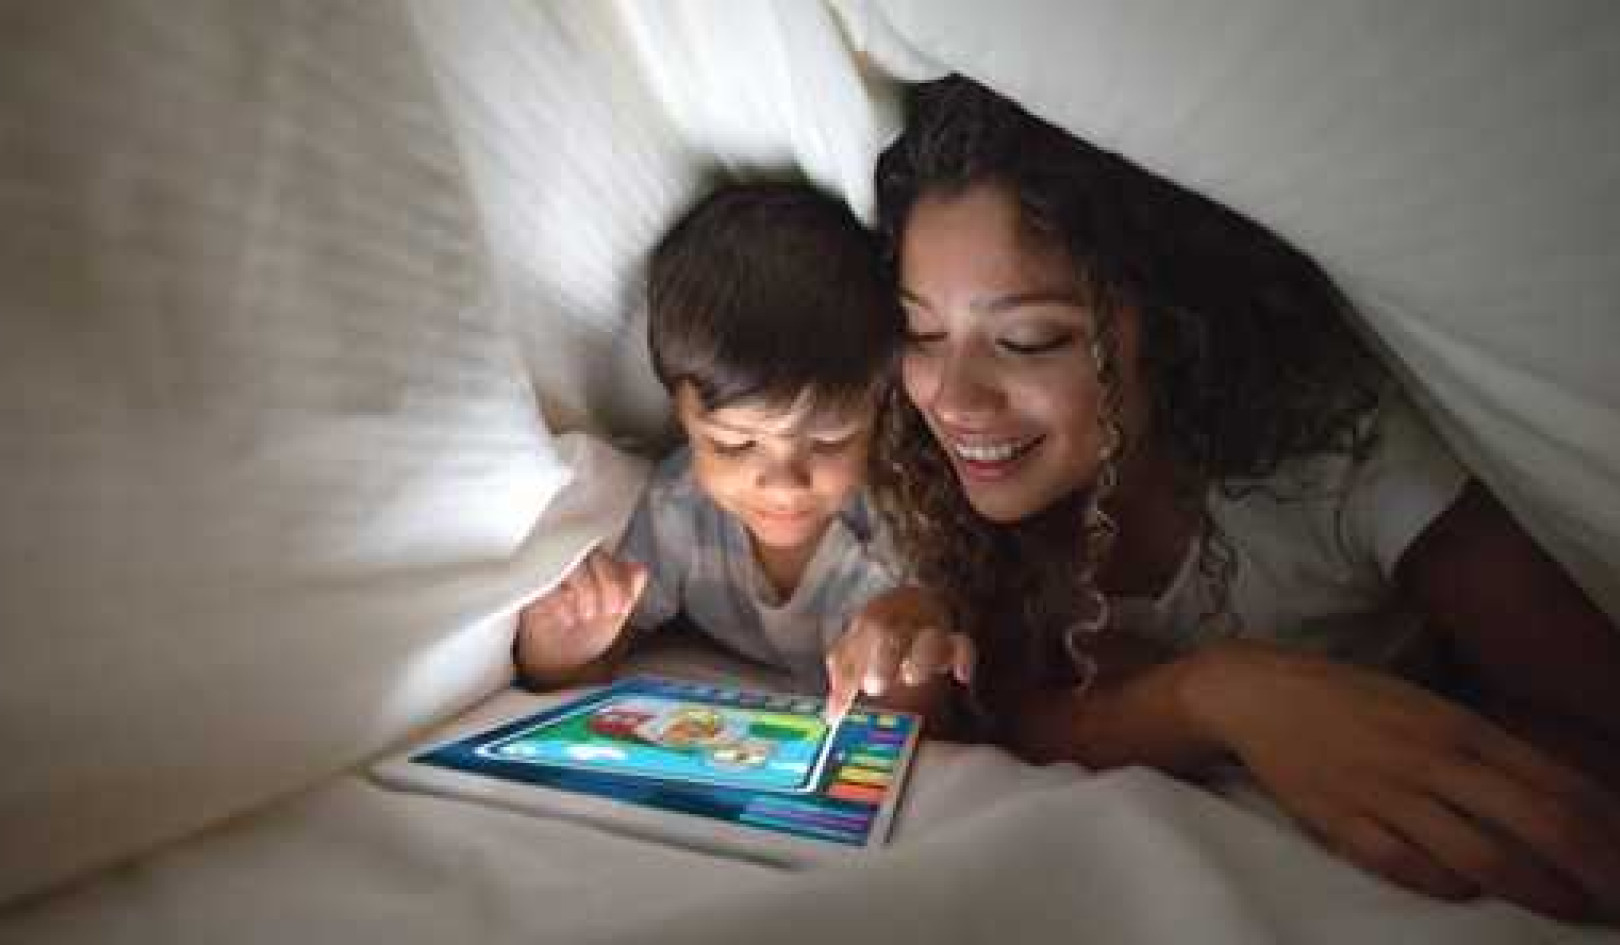 3 Smart Ways To Use Screen Time While Coronavirus Keeps Kids At Home